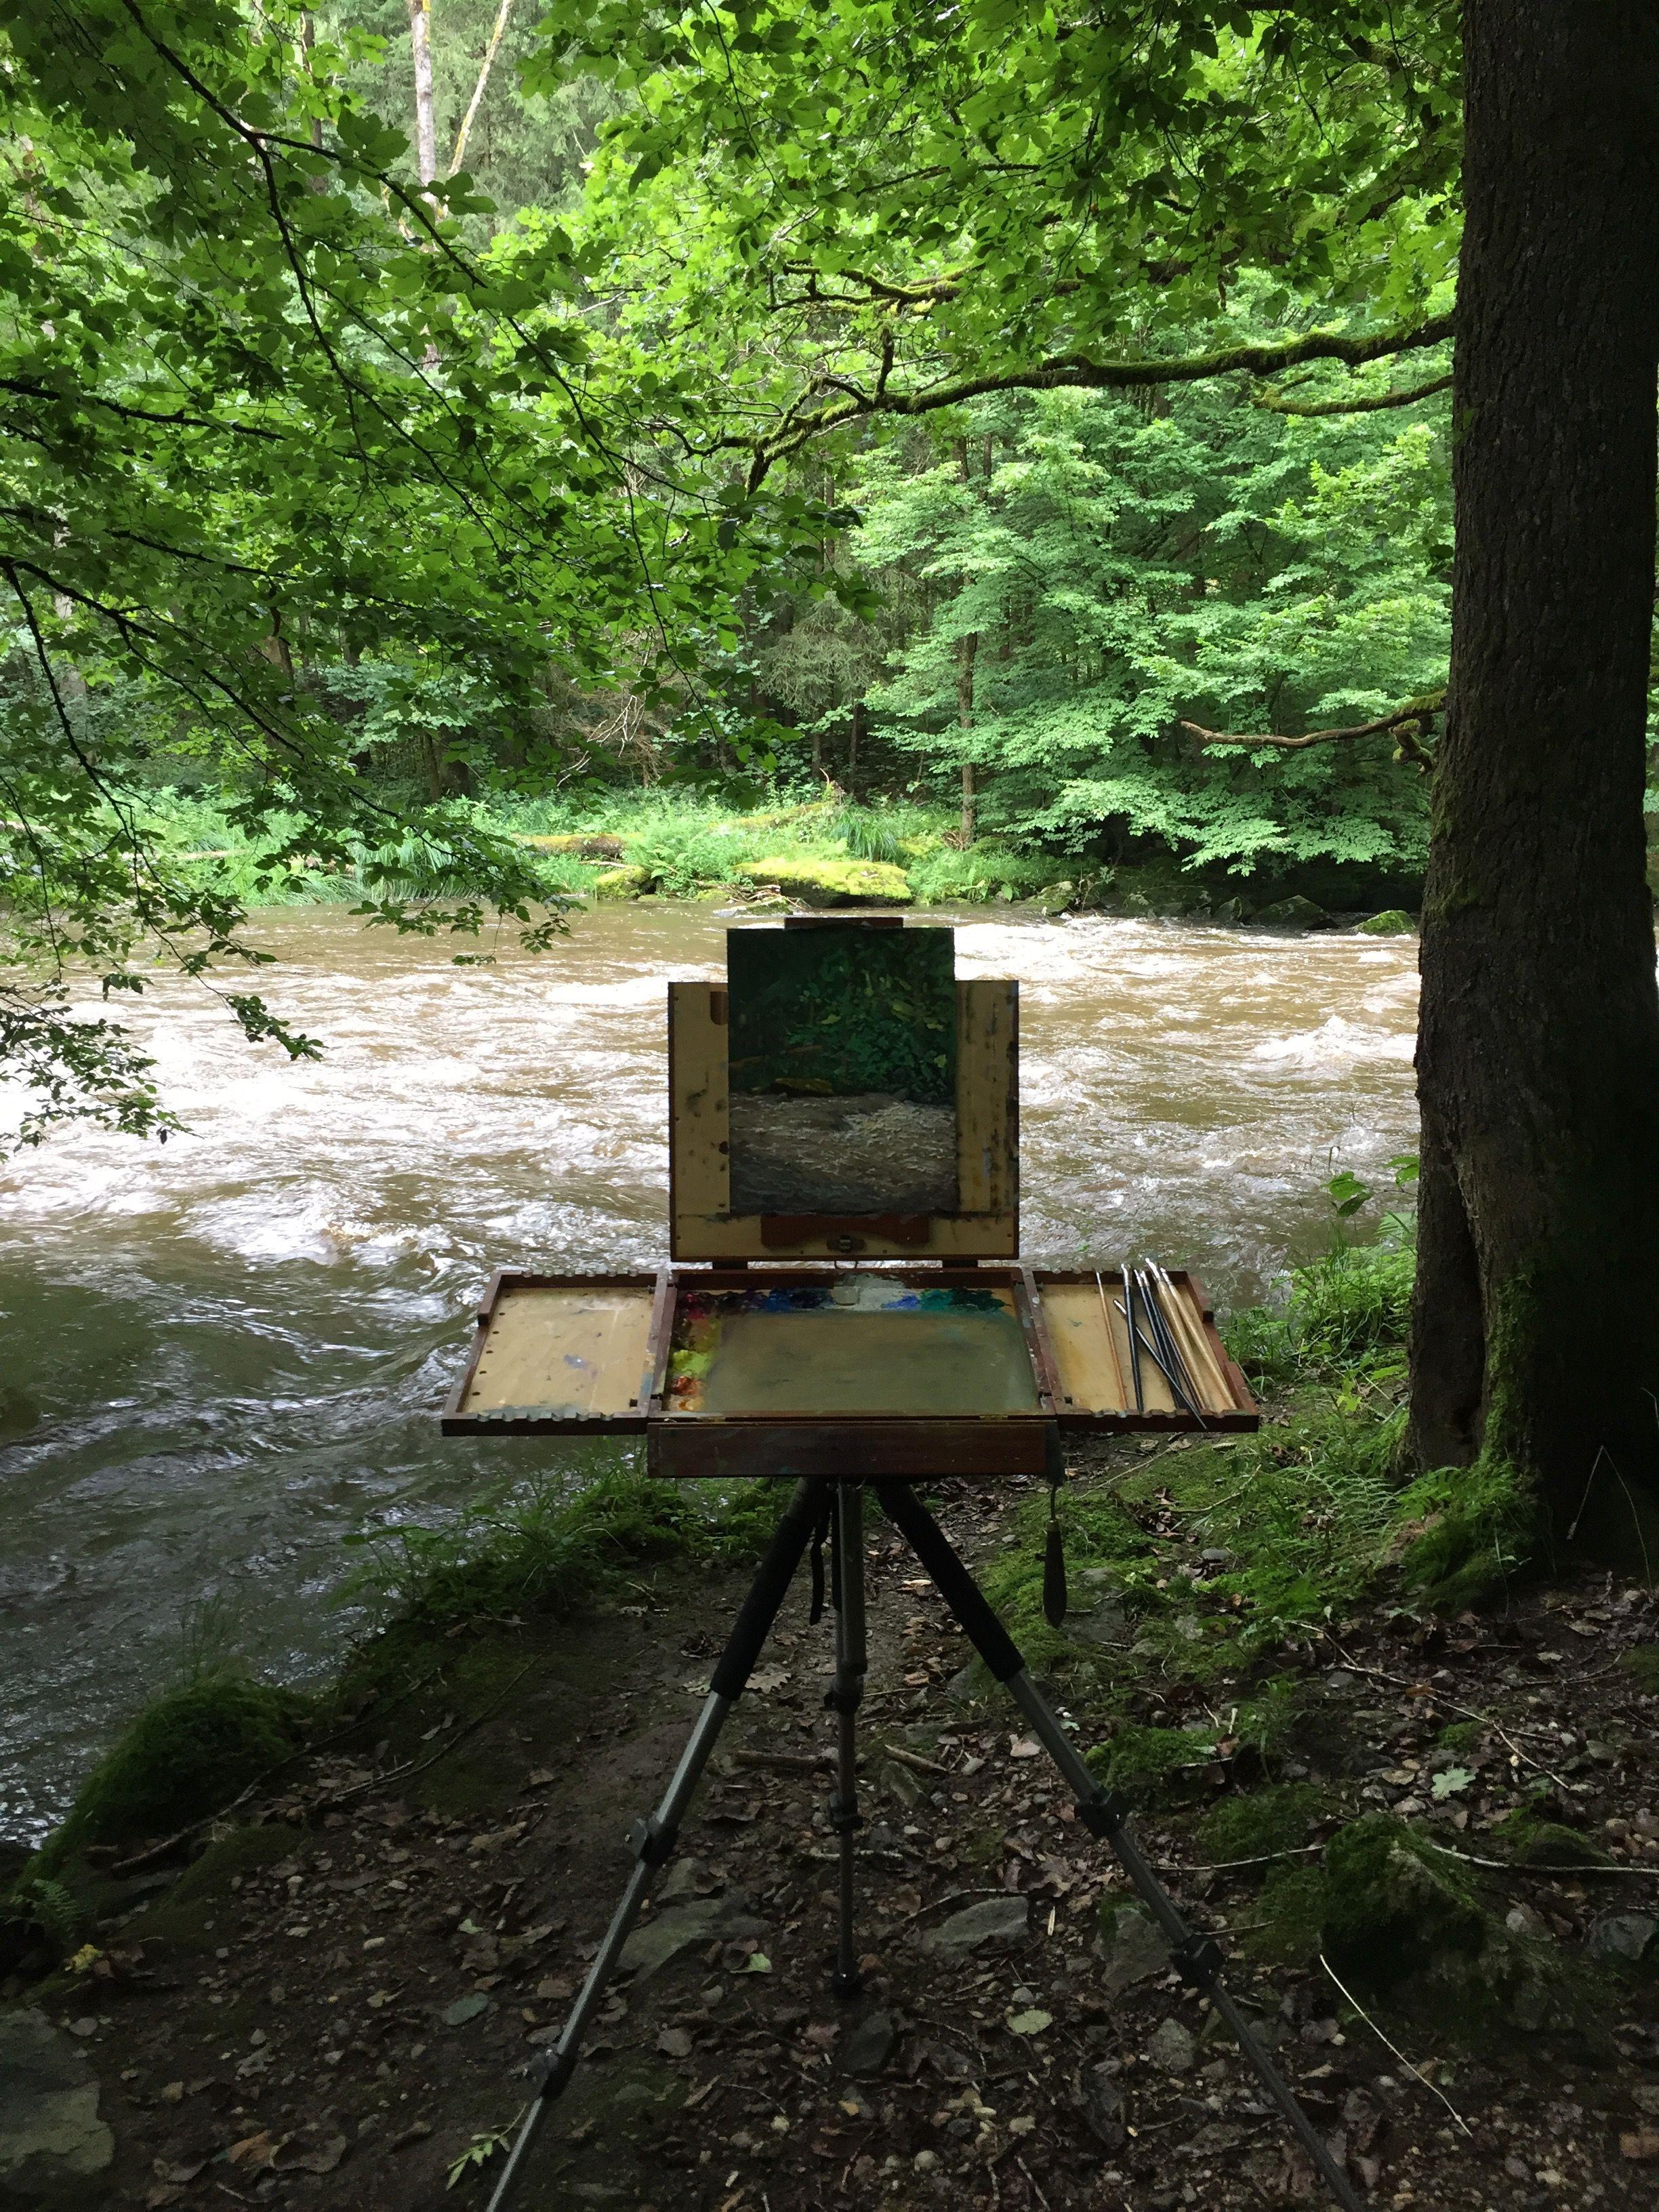 Plein air painting in Bavarian Nationalpark on the River Wolfsteiner Ohe, F├╝rsteneck Ohrbruck Germany.  What an experience, standing on the bank of this very fast flowing river, the sound was unbelievable, just fantastic. I had great fun using